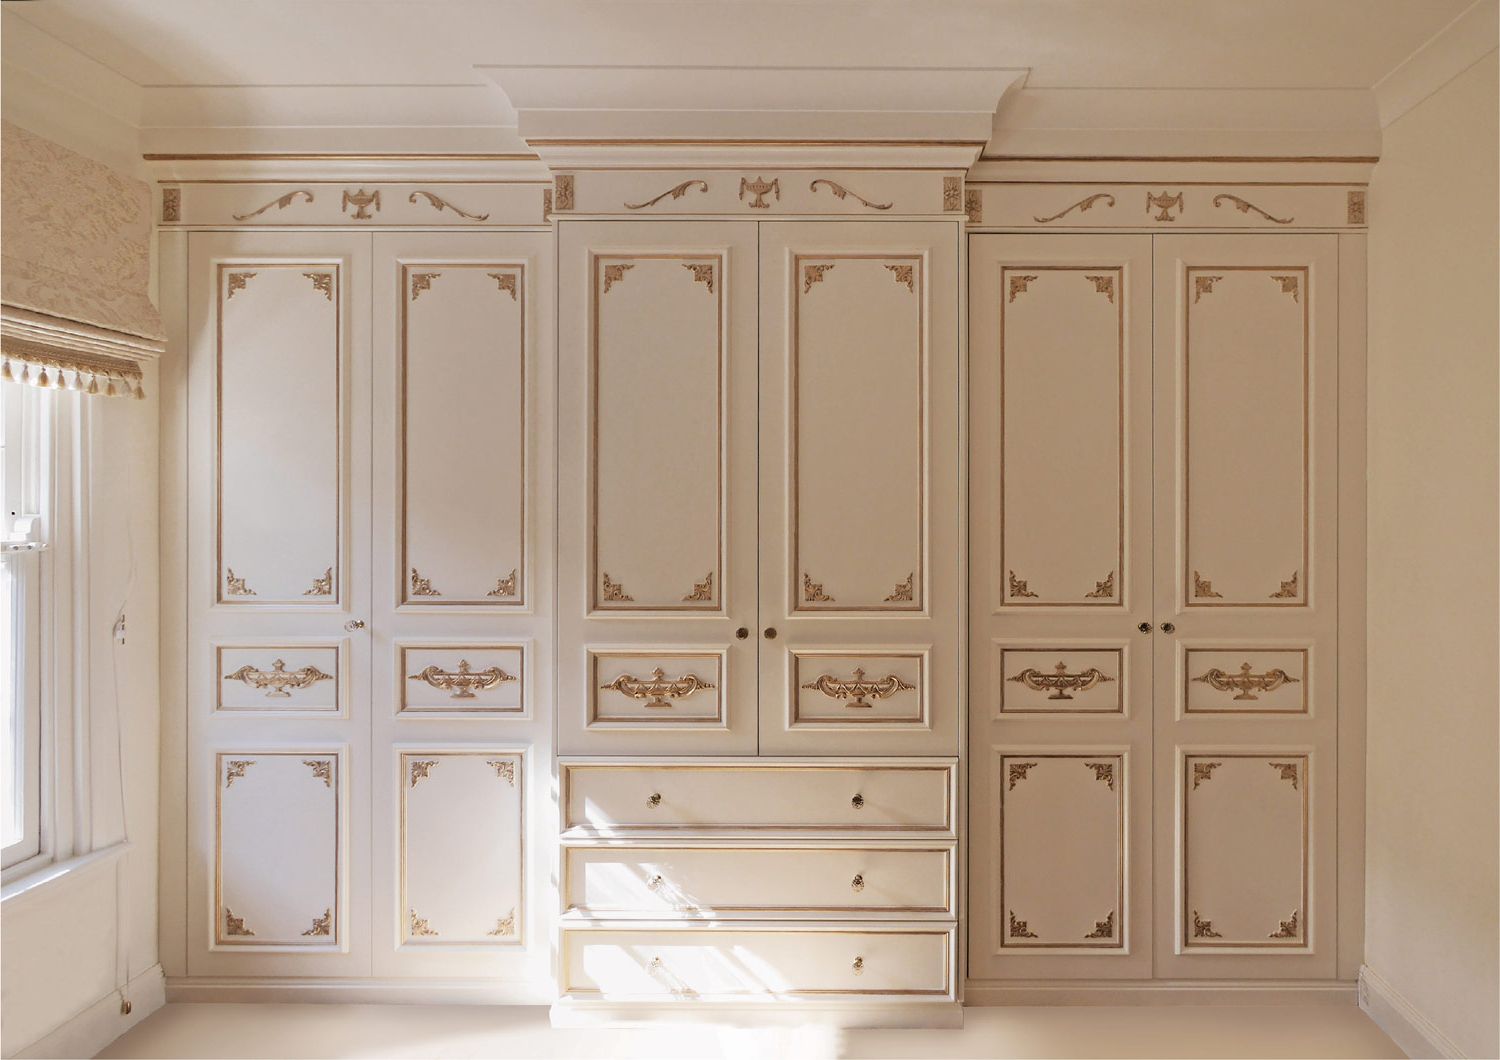 Breathtaking French Wardrobe Designs | Custom Made | Luxury Finishes Inside French Built In Wardrobes (Gallery 1 of 20)